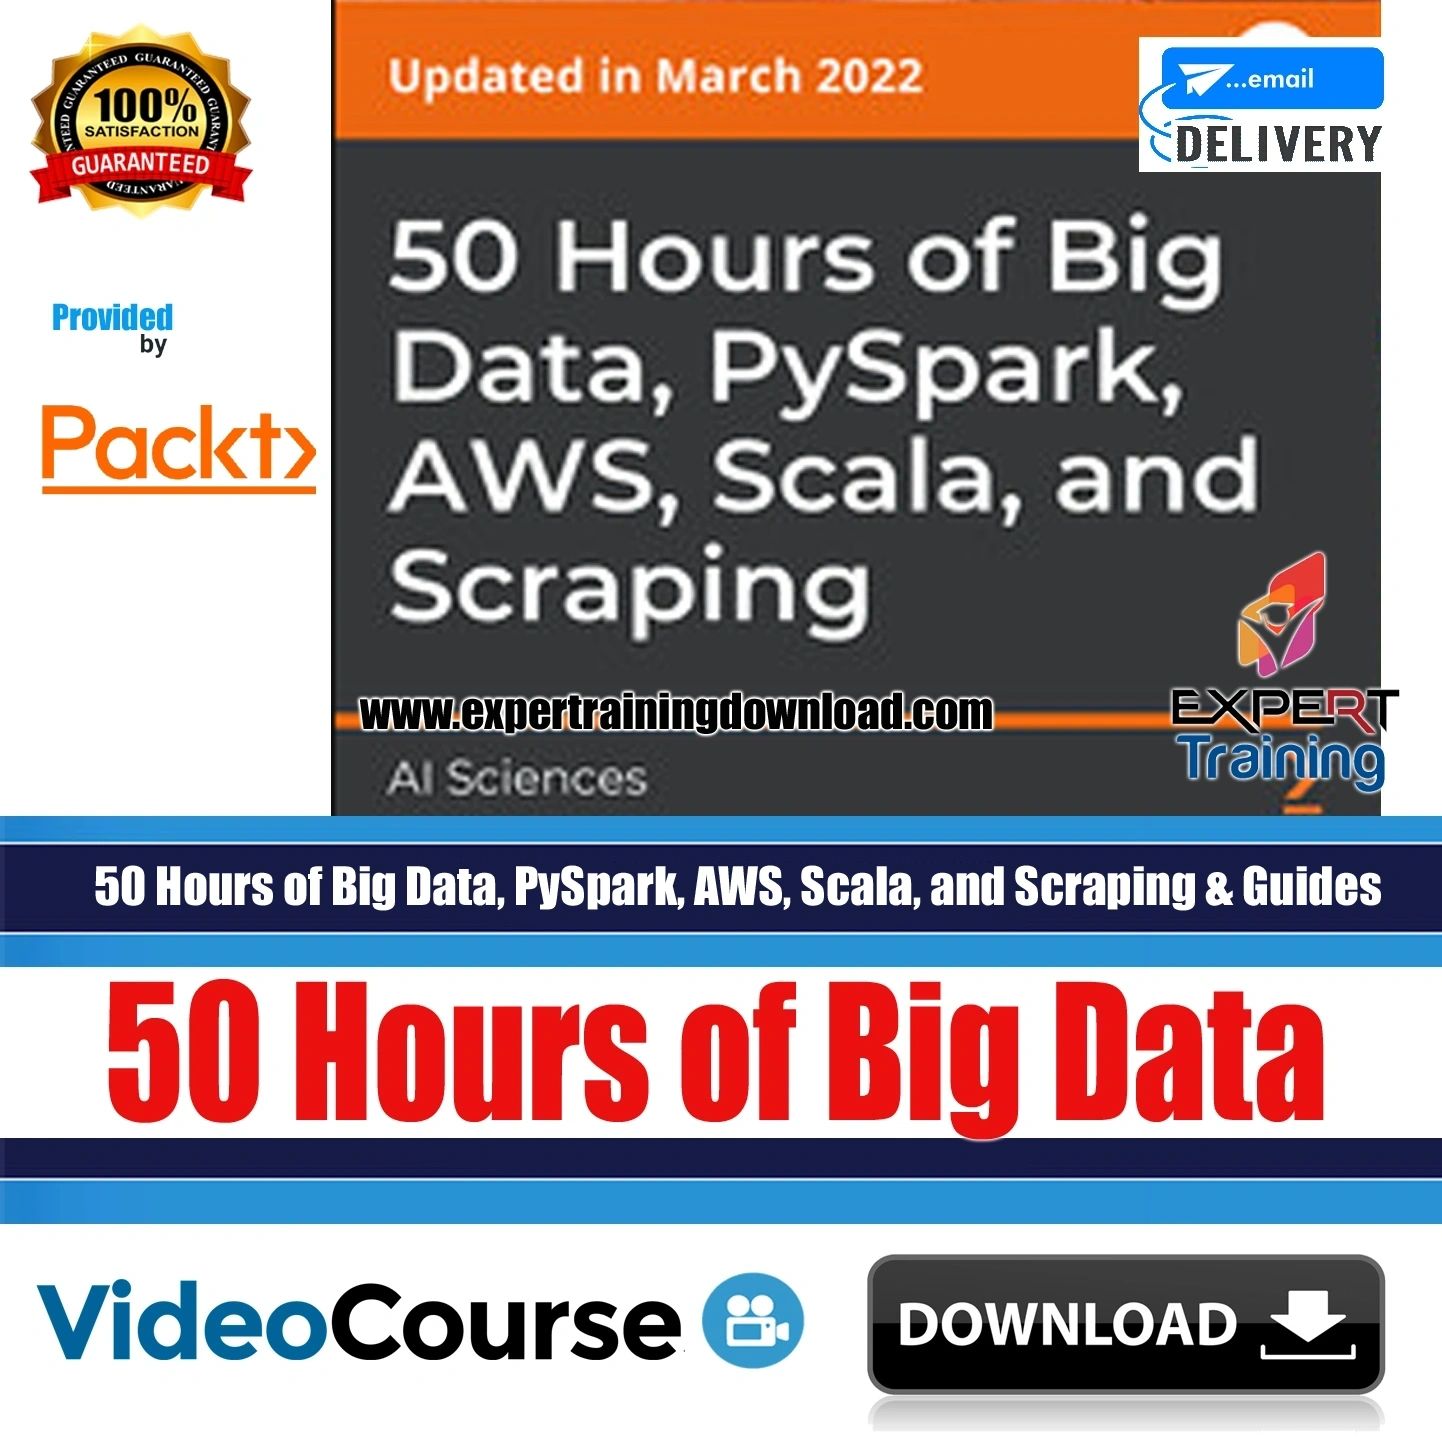 50 Hours of Big Data, PySpark, AWS, Scala, and Scraping & PDF Guides